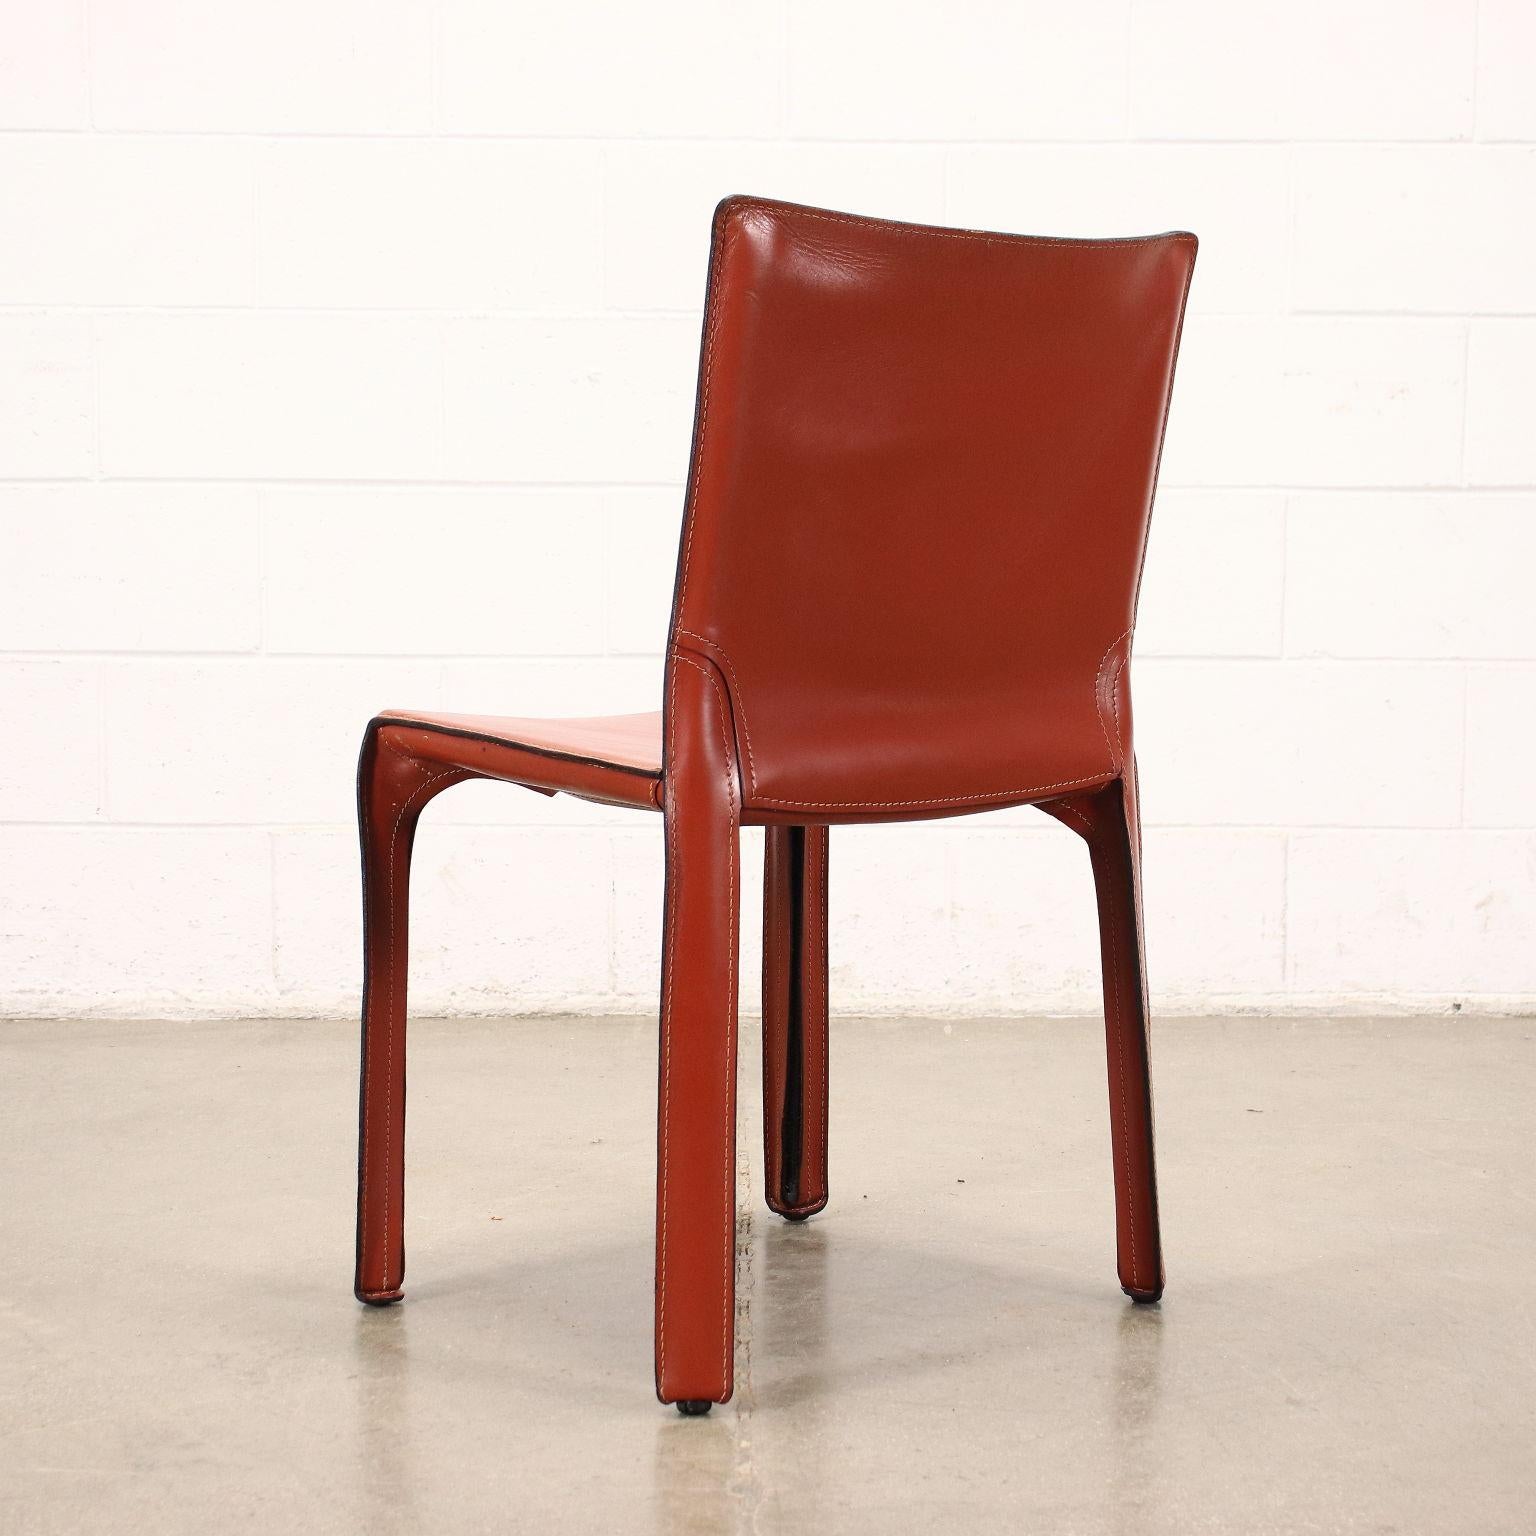 Metal Group Of Eight Chairs Cab 412 Mario Bellini Cassina Leather Italy 1980